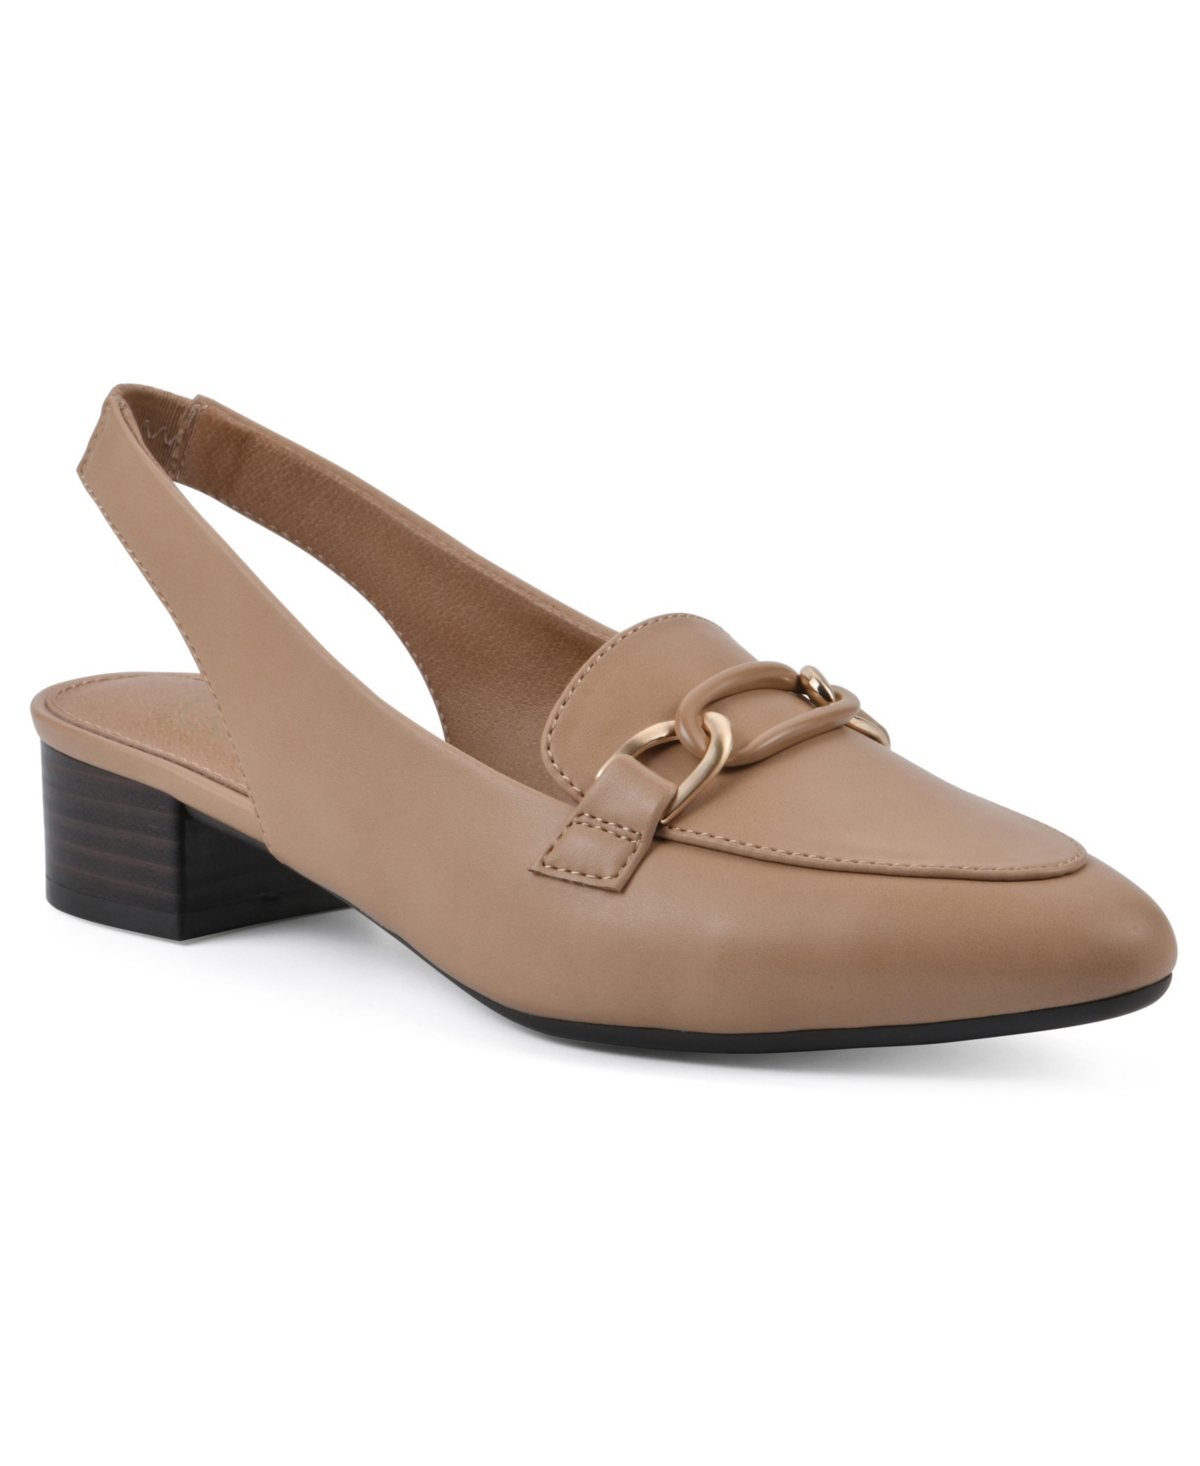 Women's Boreal Slingback Loafers - Nude Smooth